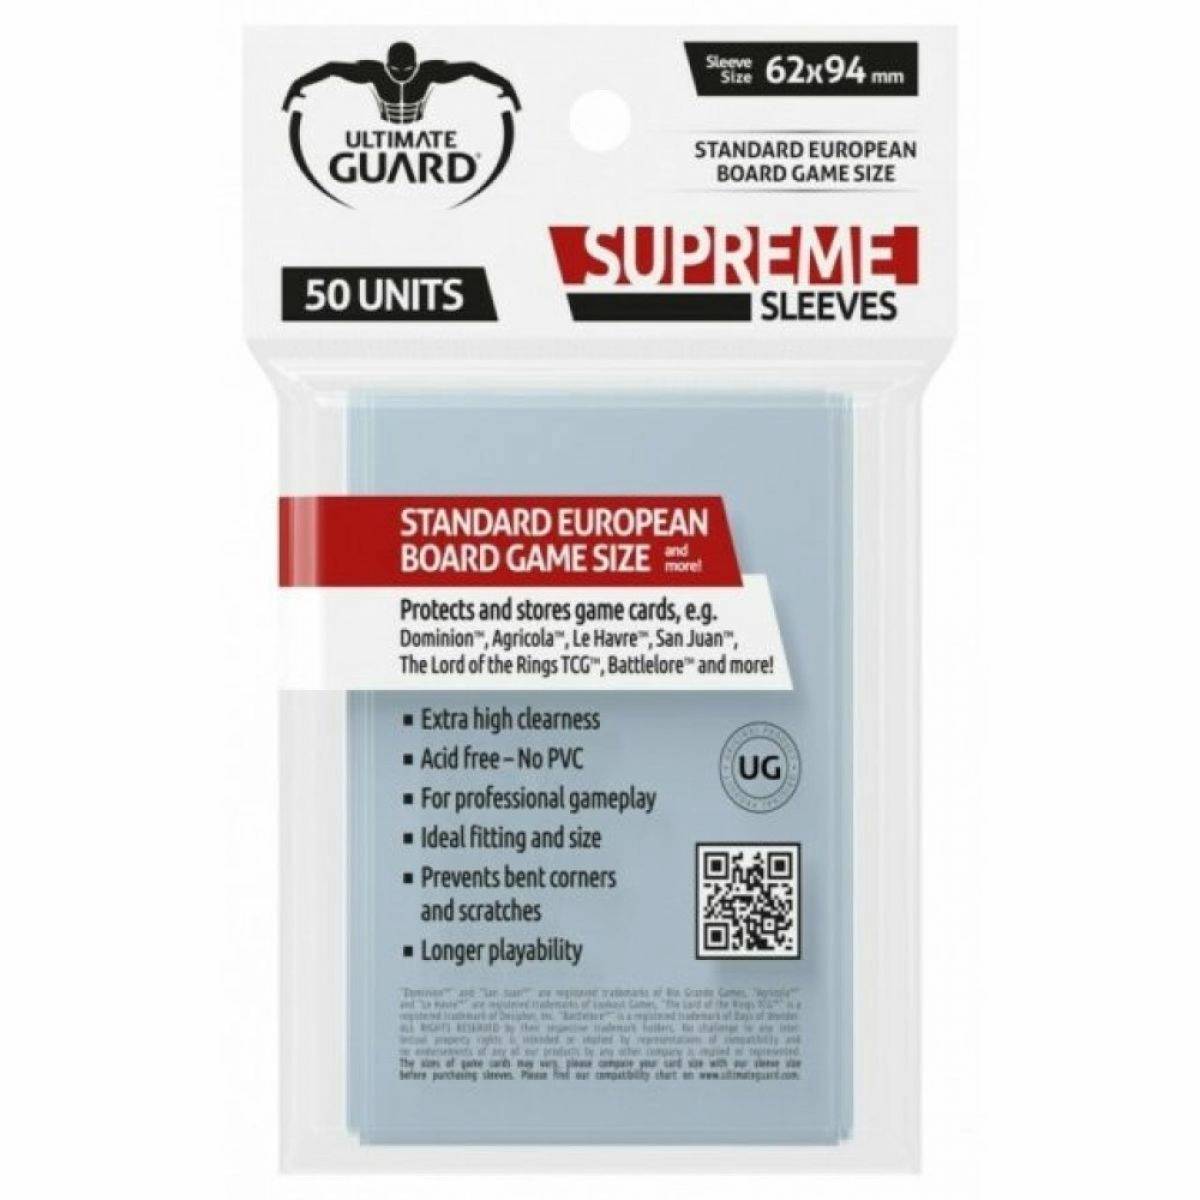 Ultimate Guard Supreme Sleeves For Board Game Cards Standard European (50)